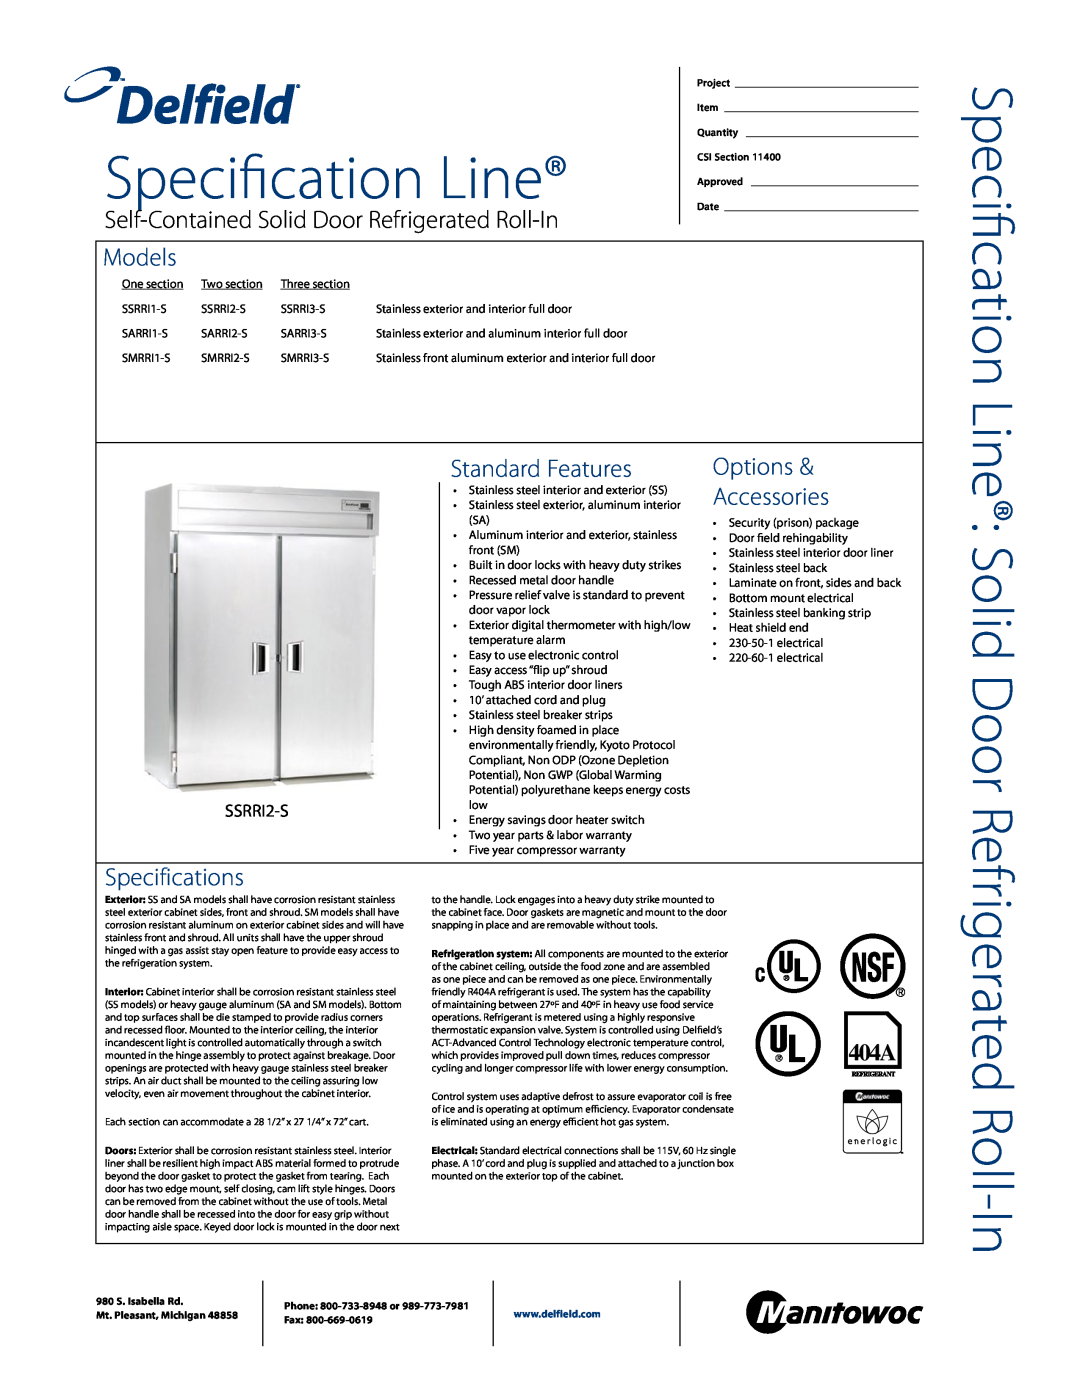 Delfield SSRRI3-S specifications Specification Line, Line Solid Door, Refrigerated Roll-In, Models, Standard Features 